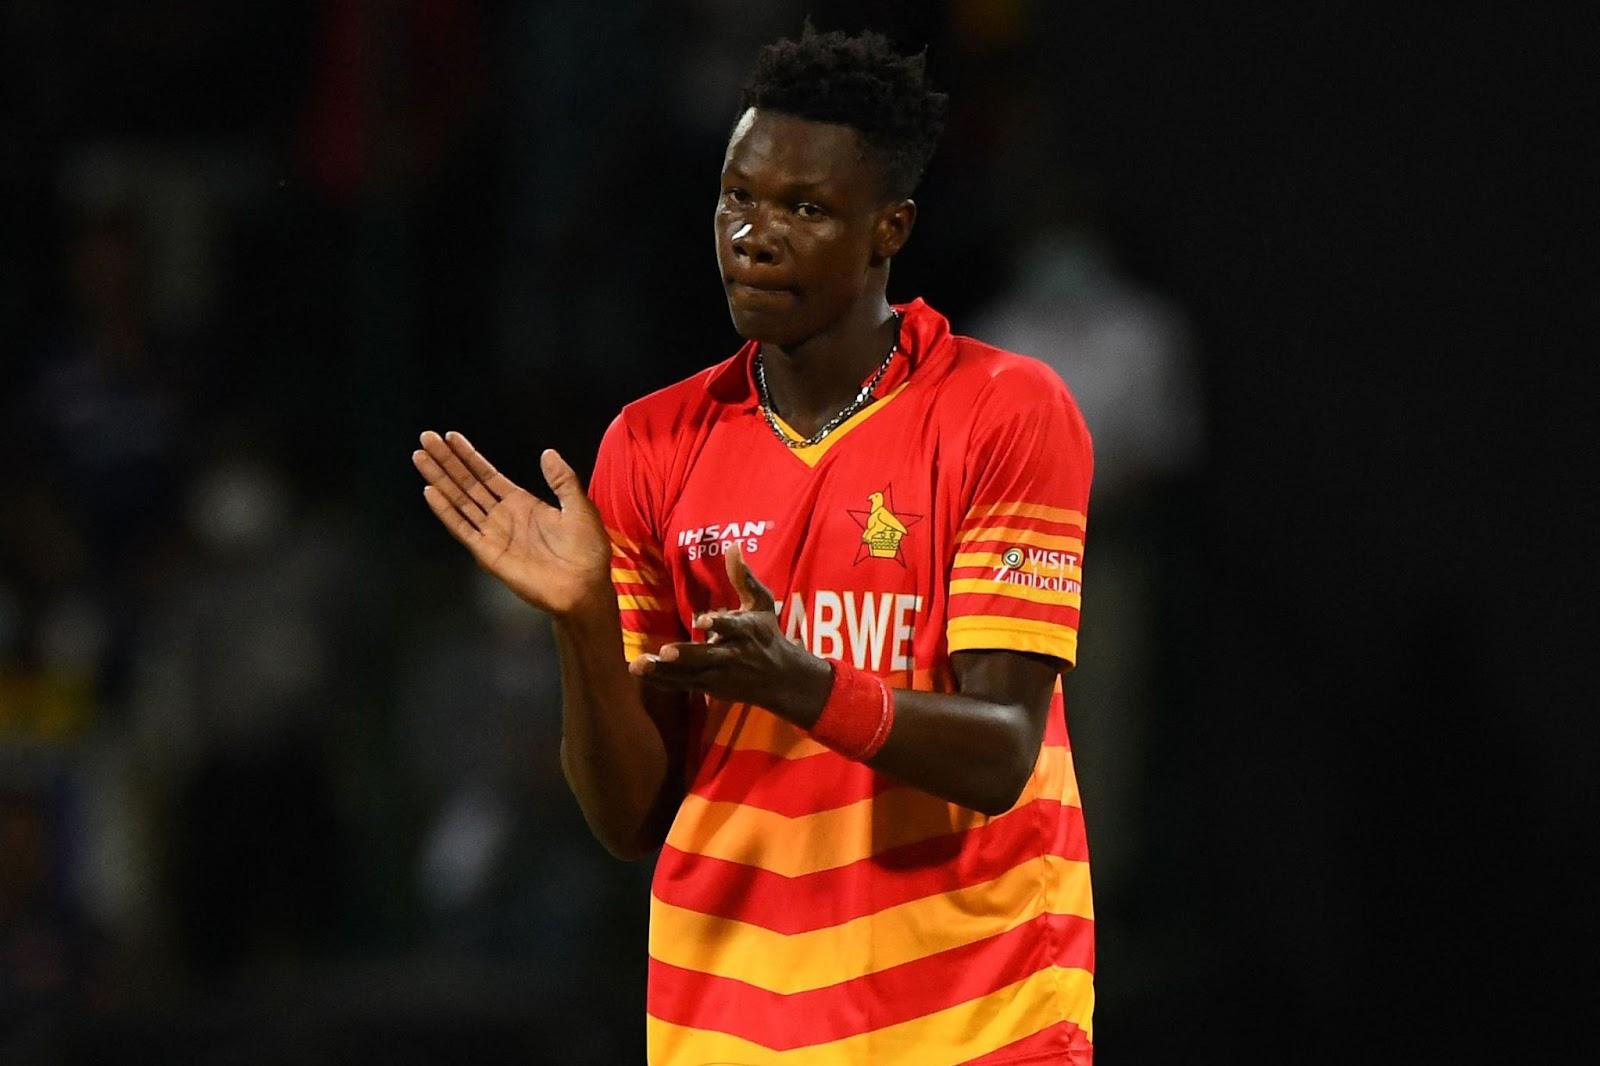 Blessing Muzarabani scalped 12 wickets in the T20 World Cup 